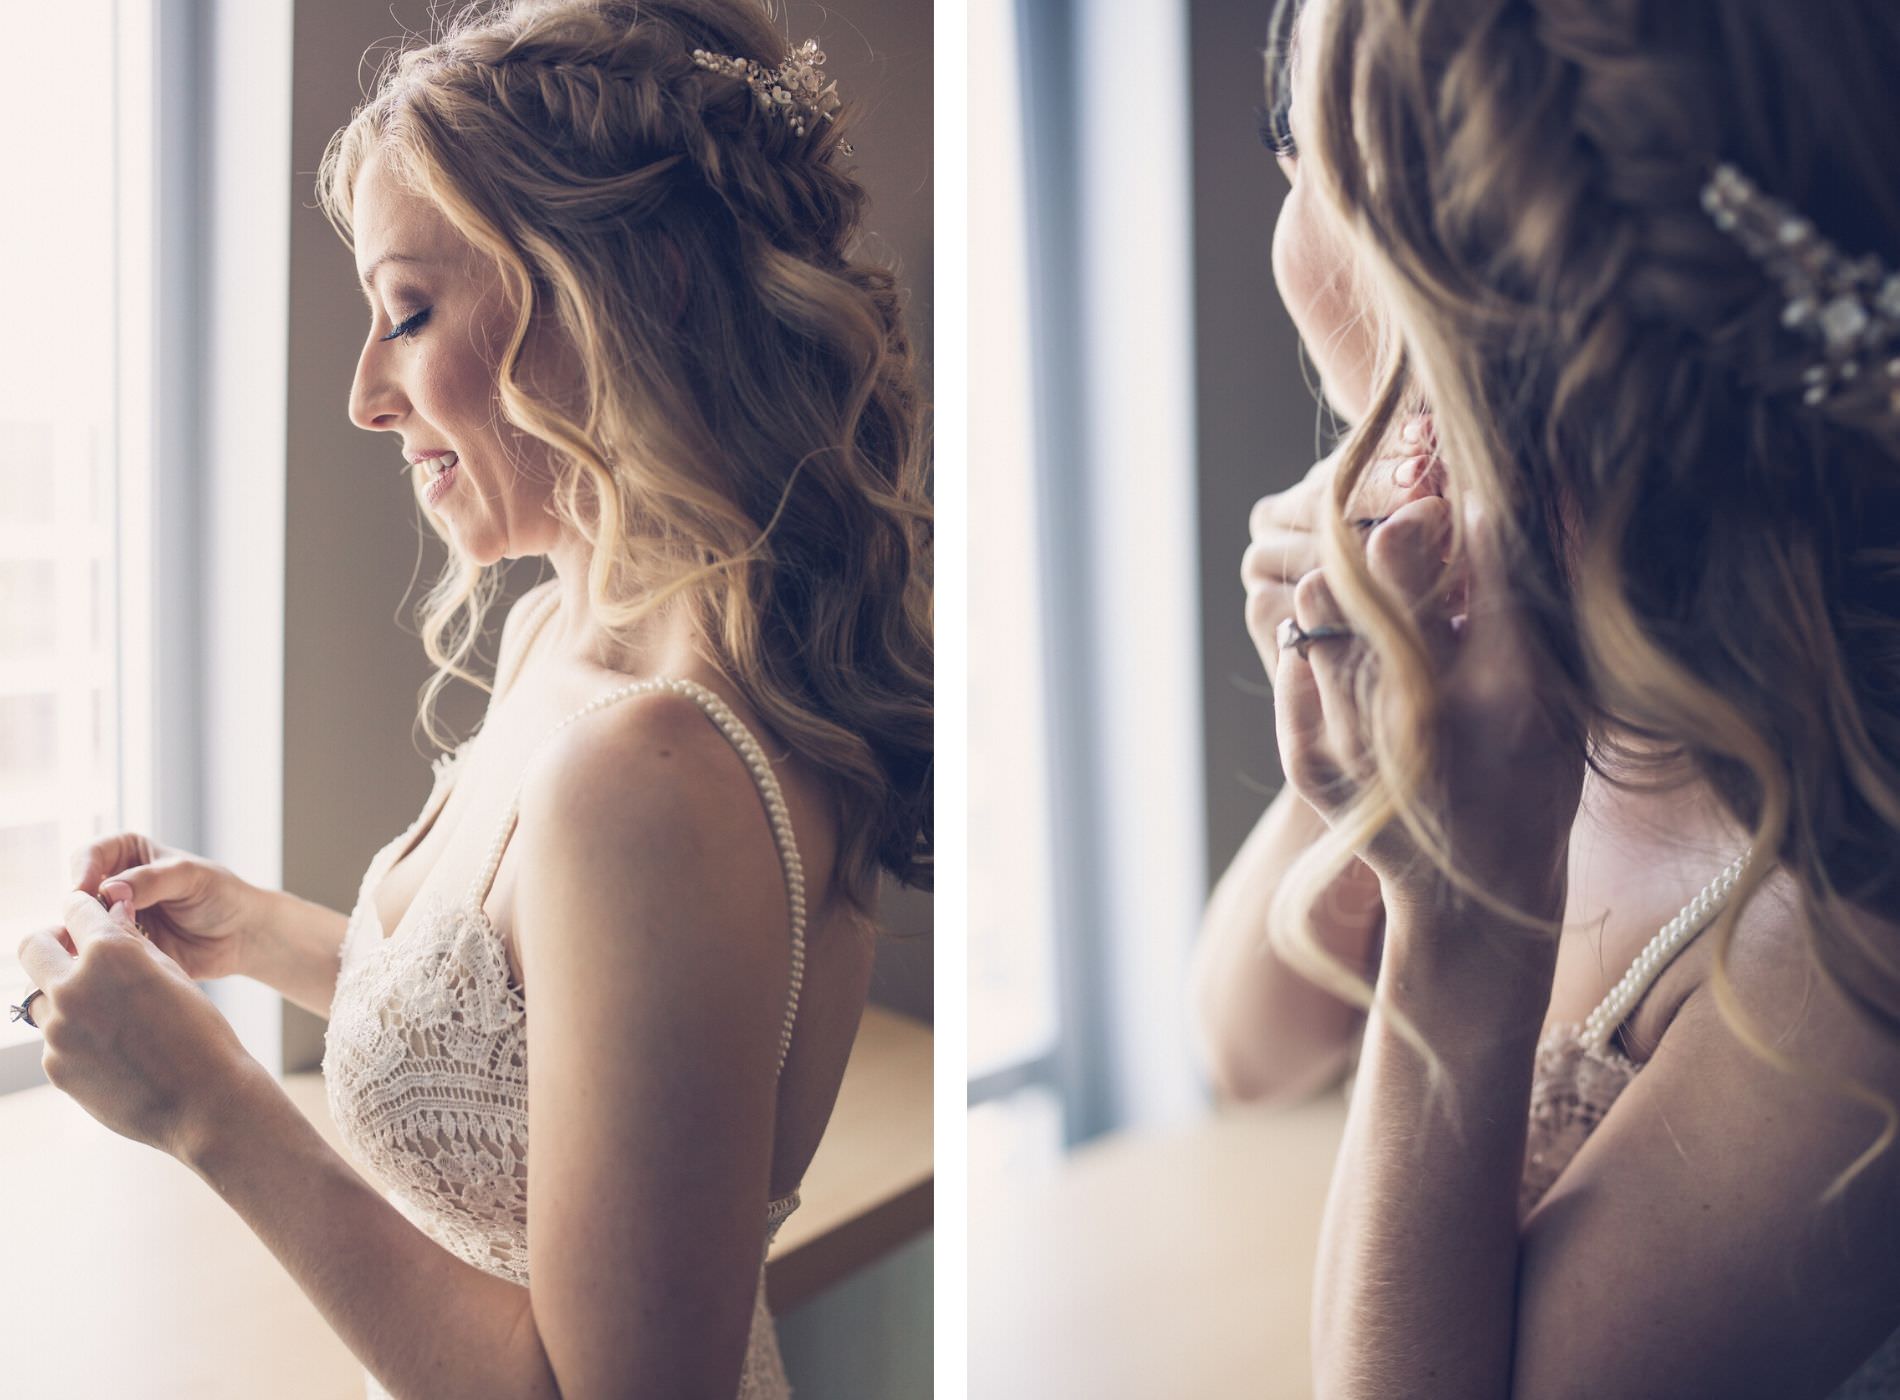 Bride Getting Dressed and Ready | Crown Braid Wedding Hairstyle Half Up Half Down with Soft Curls | Tampa Wedding Photographer Luxe Light Images | Tampa Wedding Hair and Makeup Femme Akoi Beauty Studio